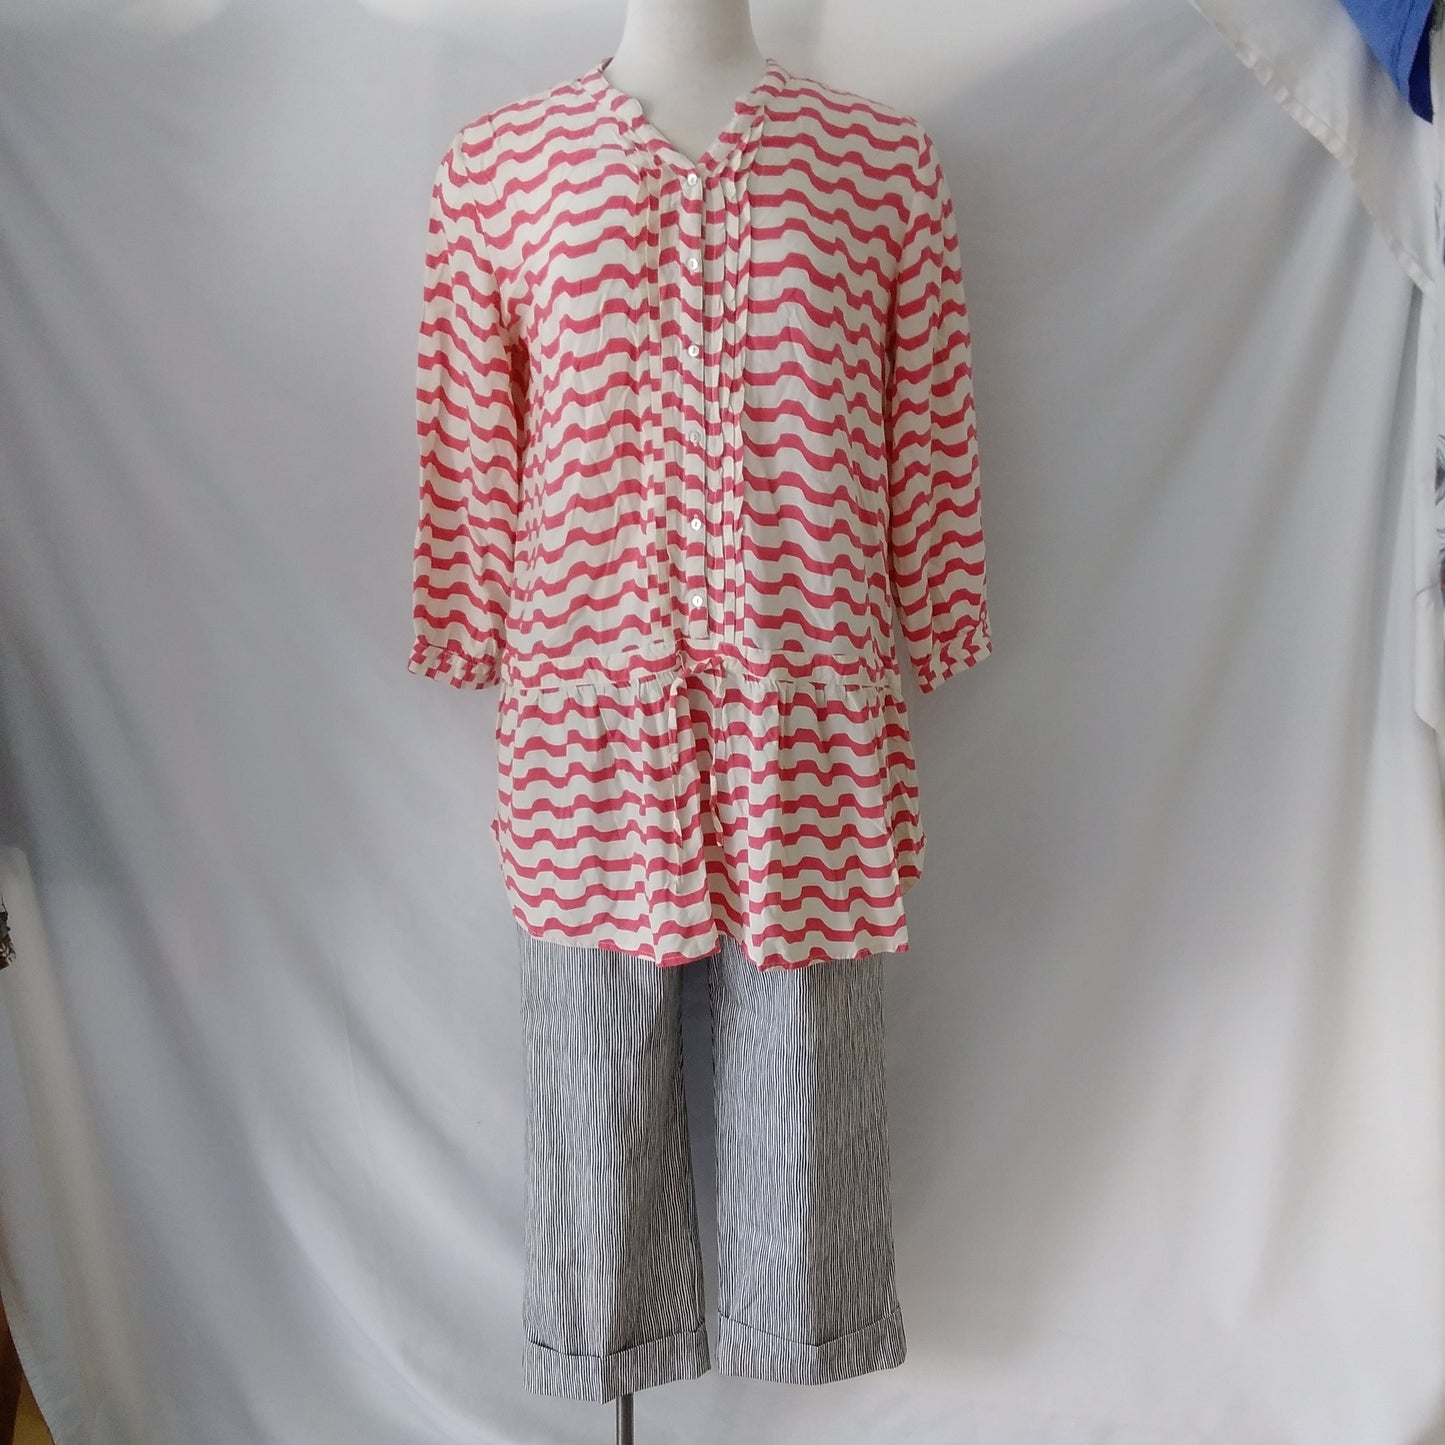 Anthropologie Isabella Sinclair Pink and White Tunic Top - L